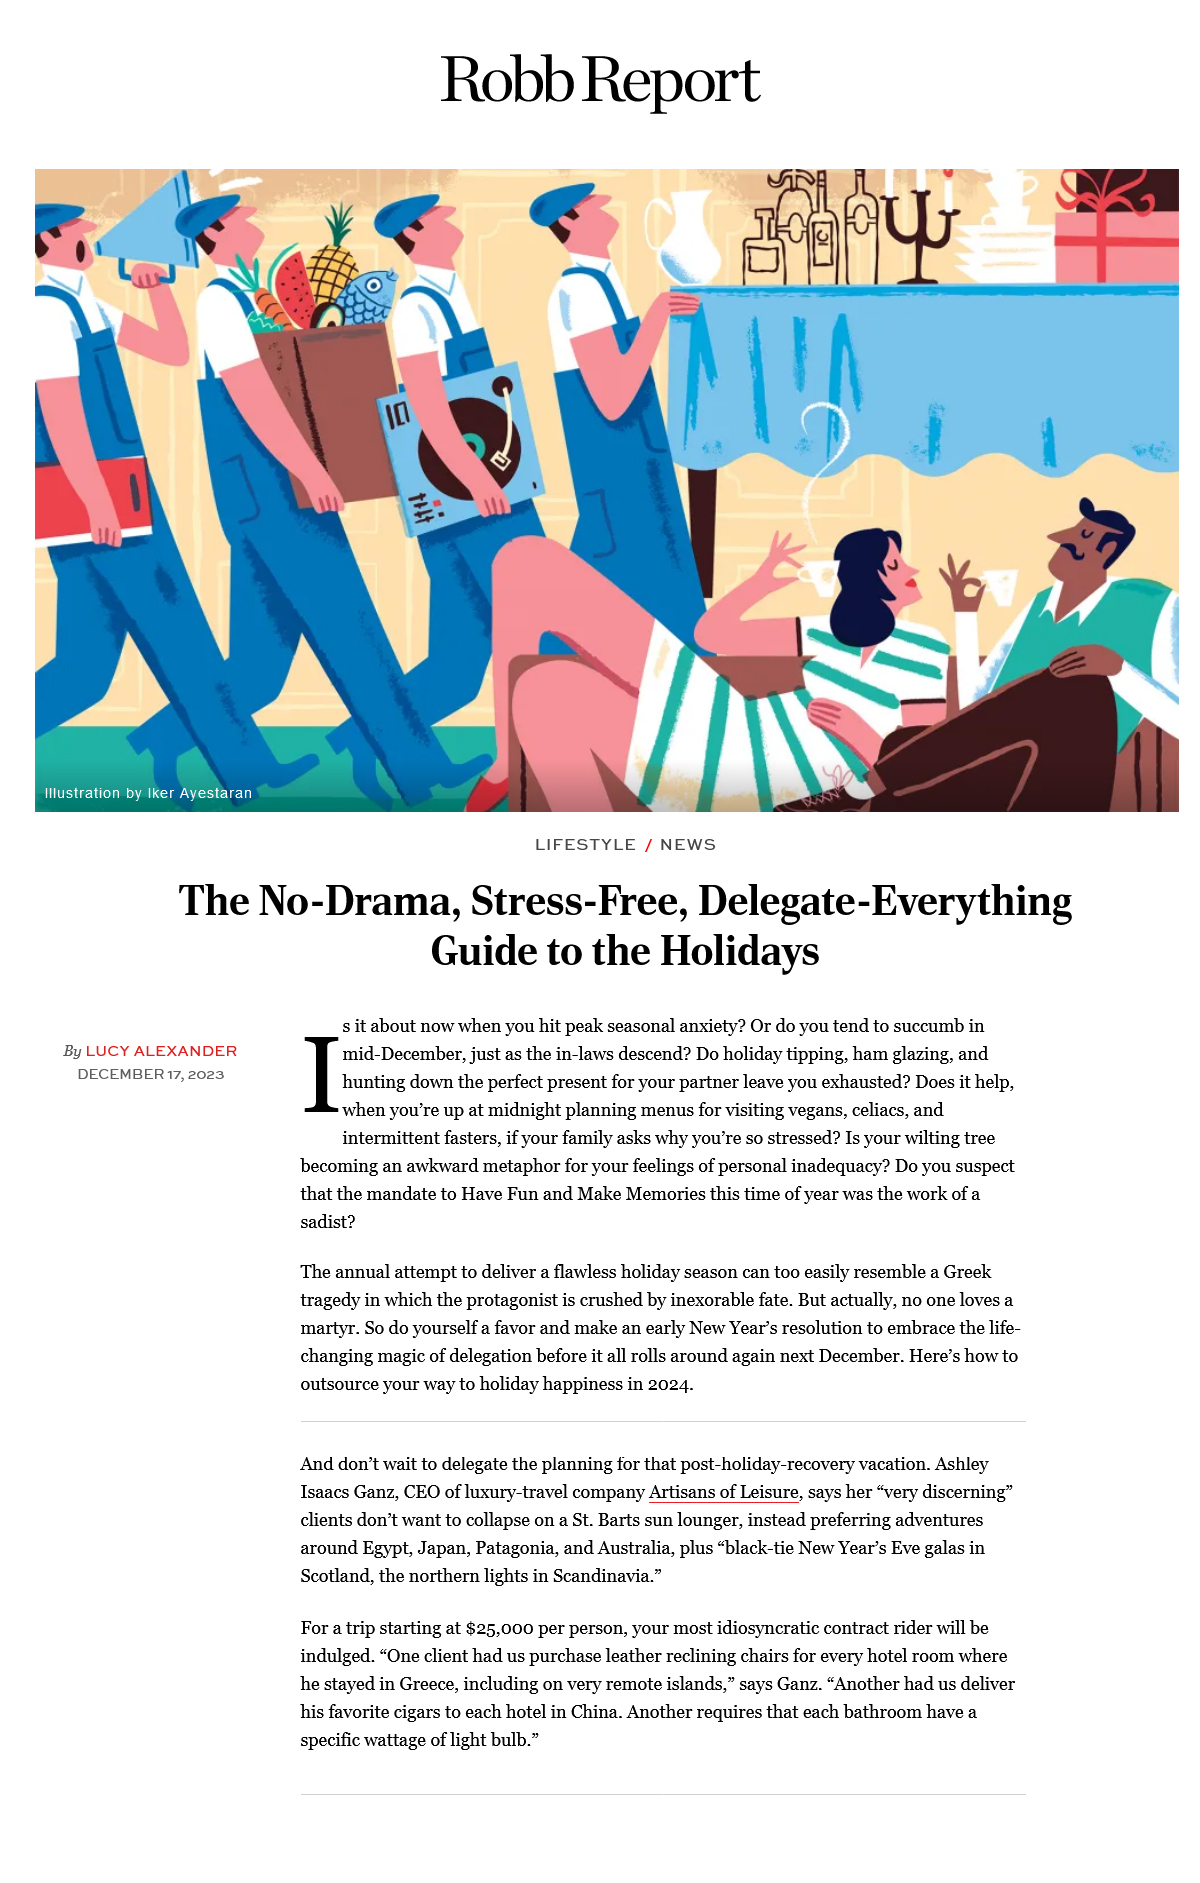 Robb Report_The No-Drama Stress-Free Delegate-Everything Guide to the Holidays